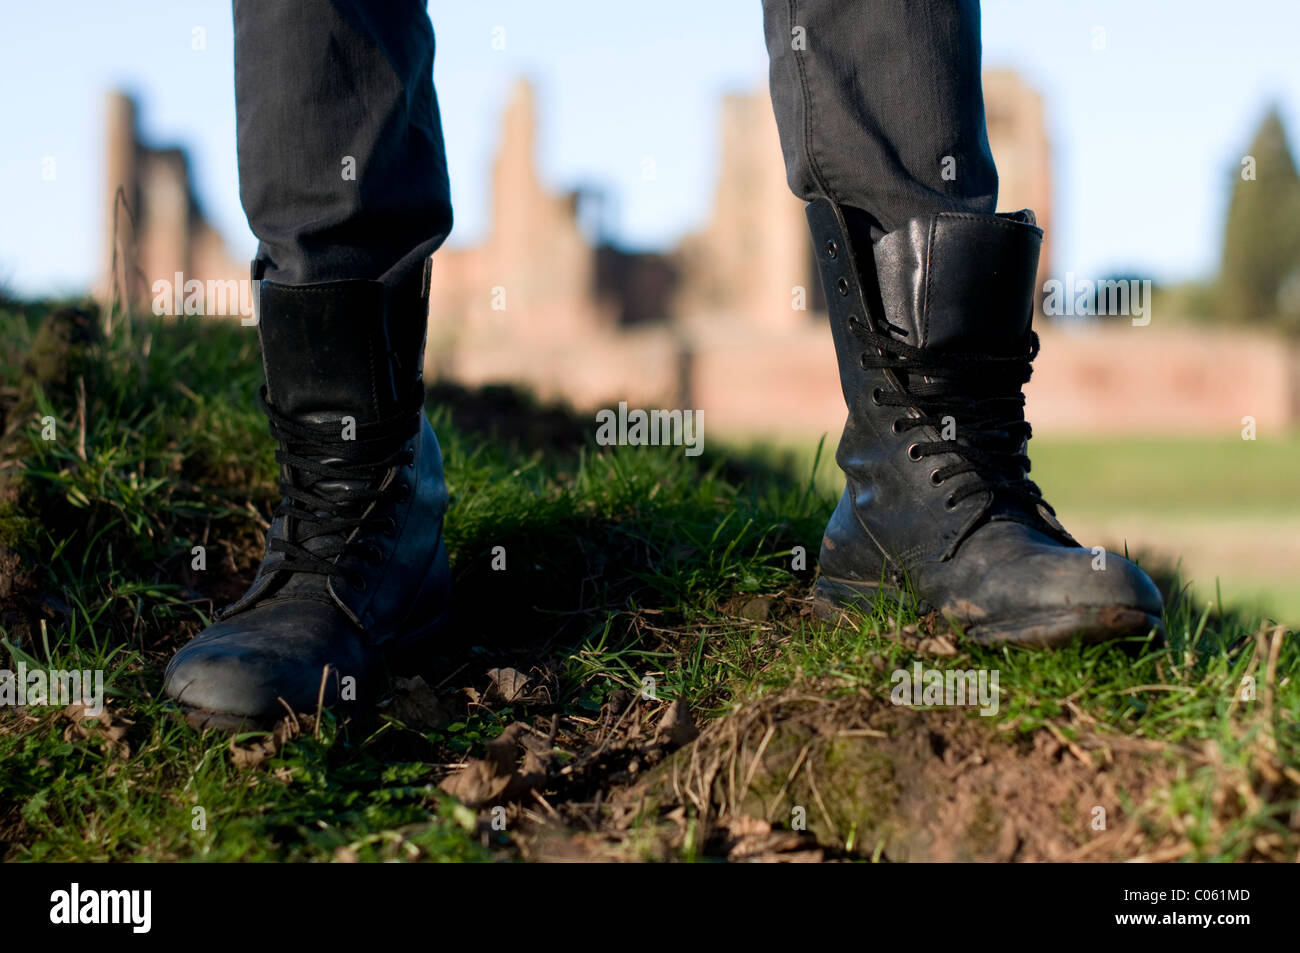 Army-style boots. Stock Photo